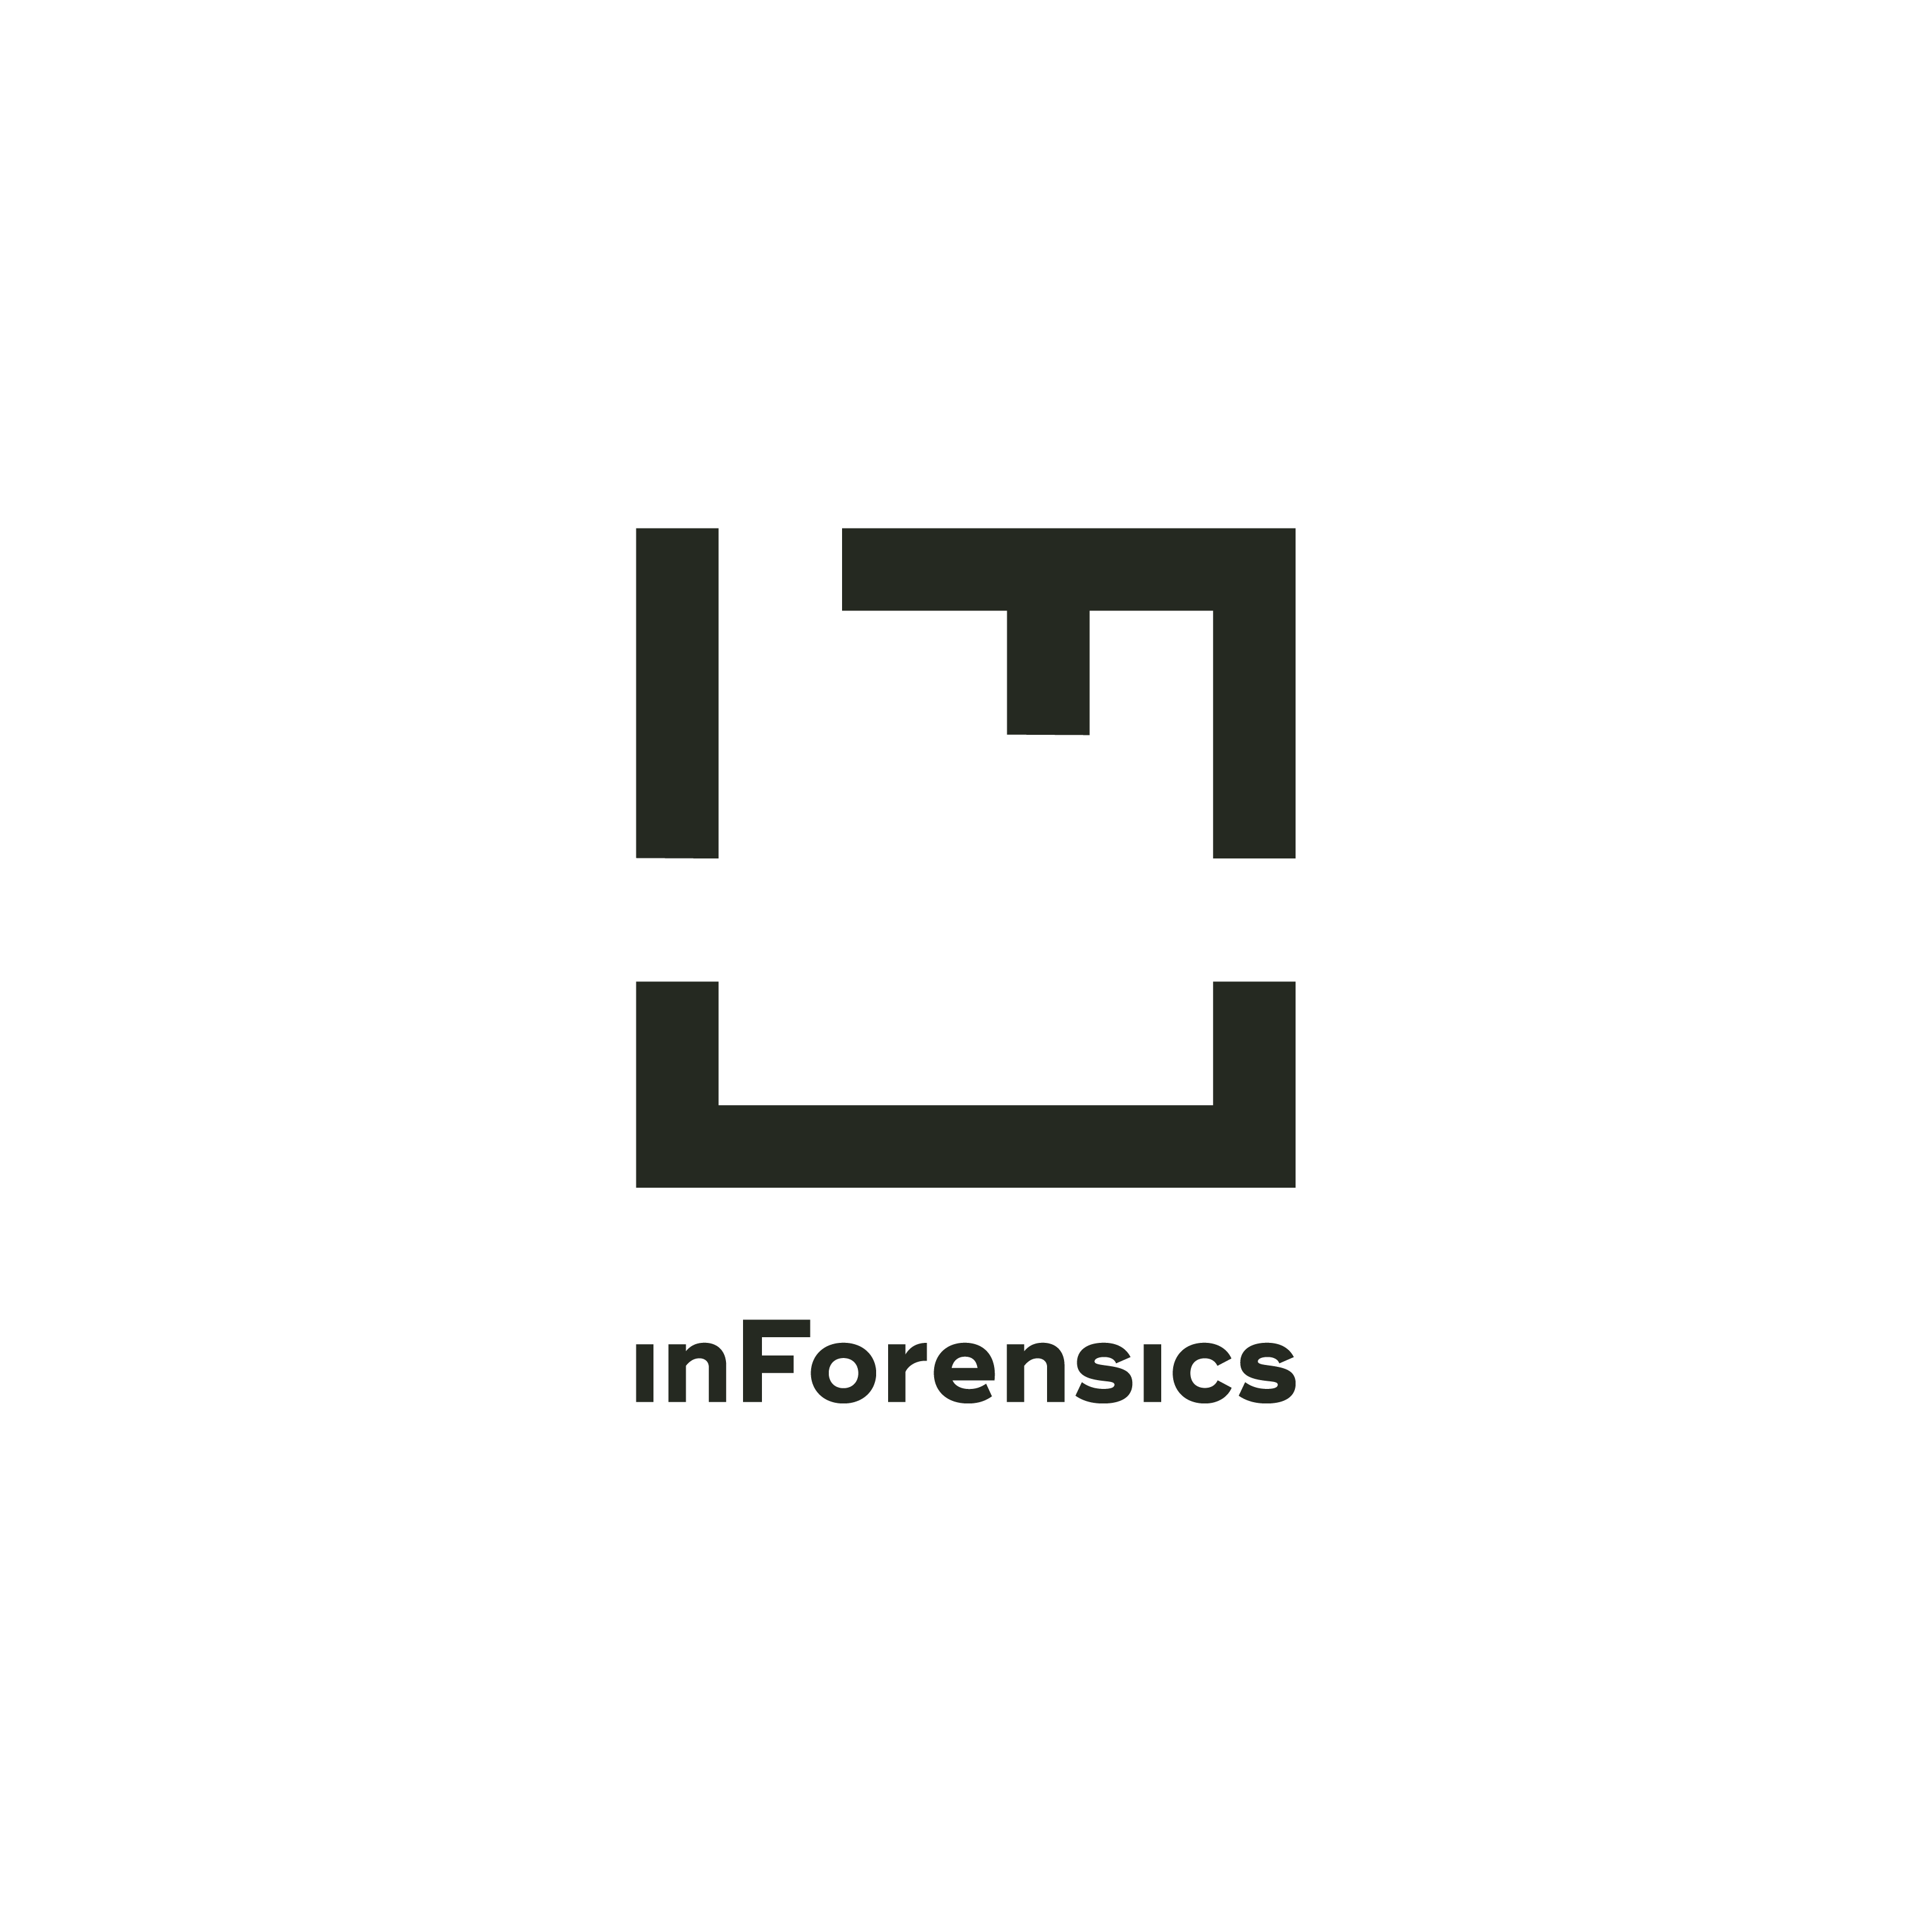 Notion Logo - Logo Design For InForensics, A Moscow Based Loss Reassessment